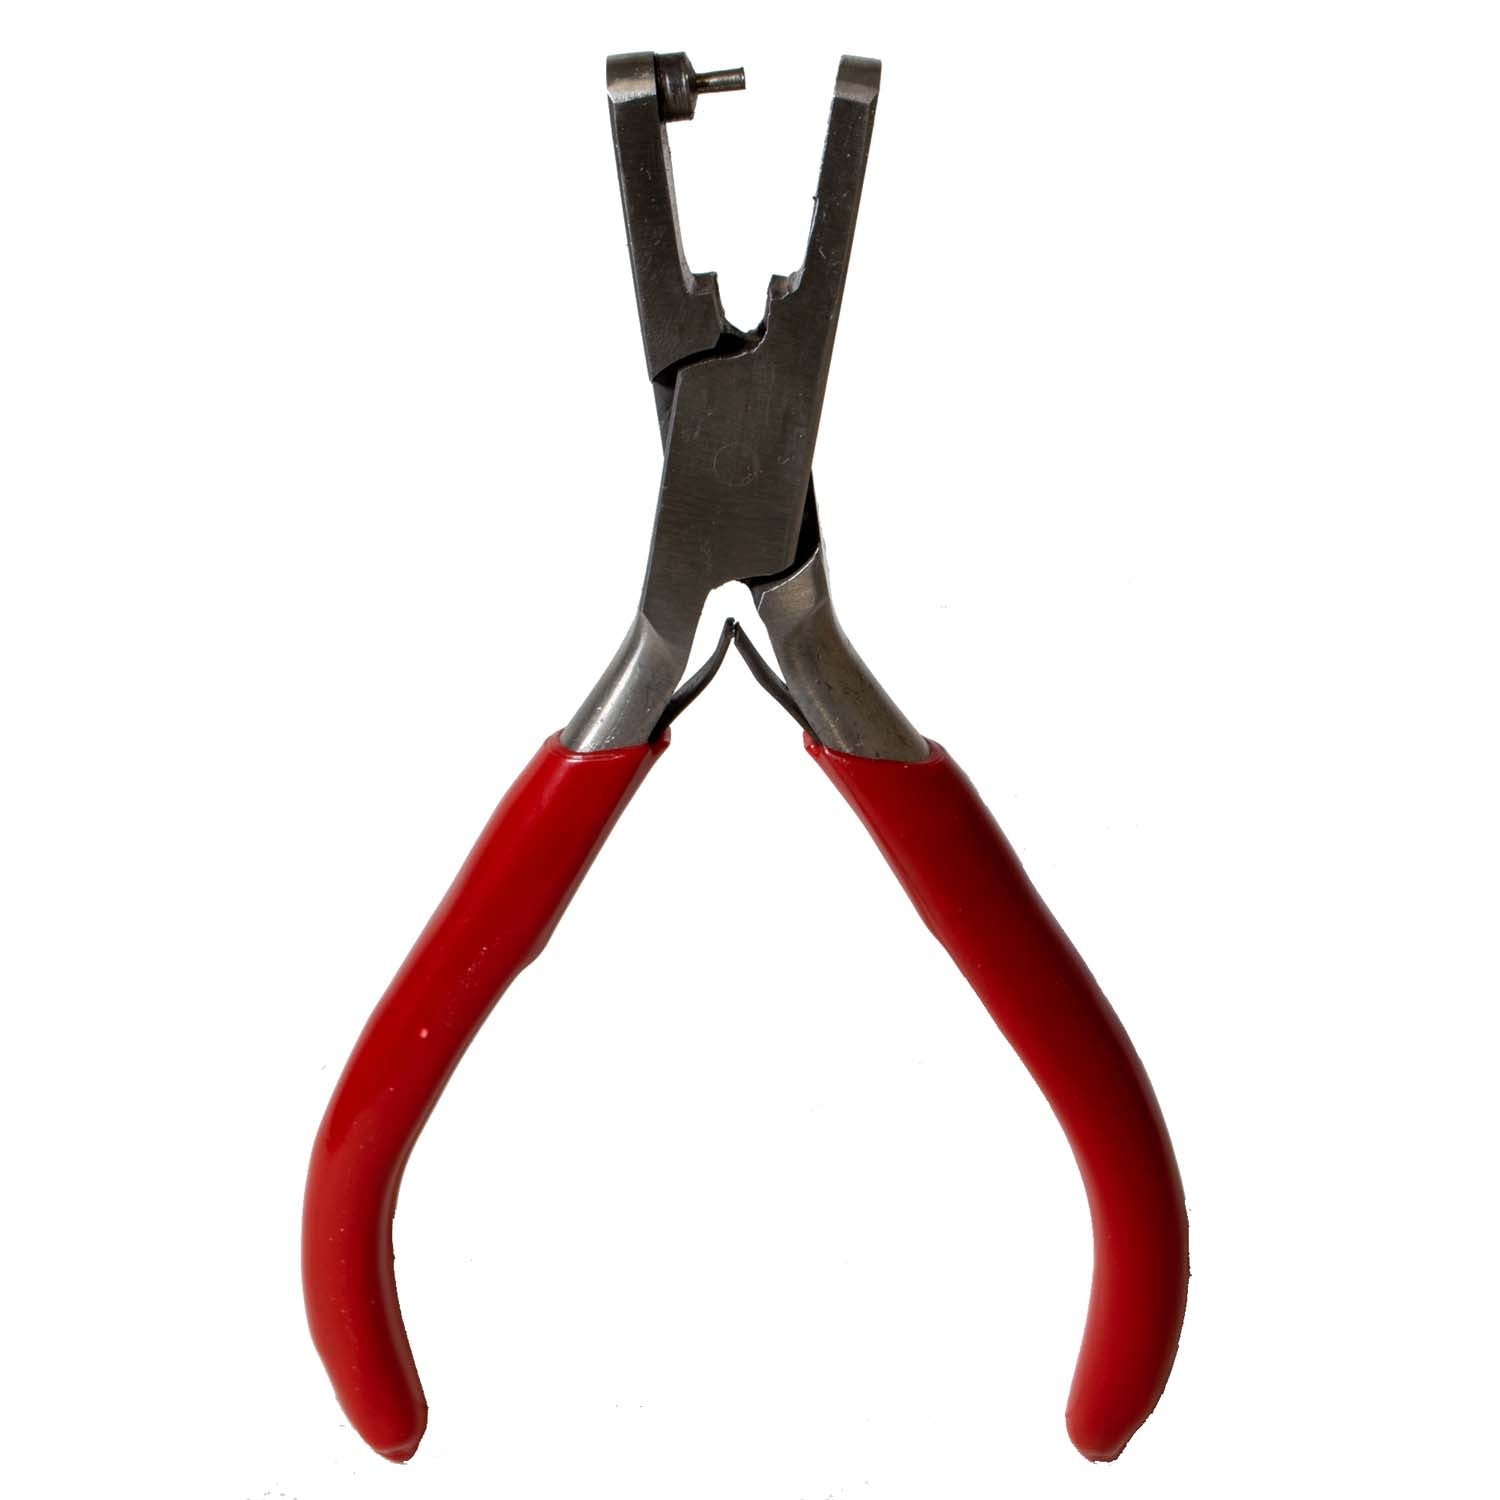 Hole-punching Pliers